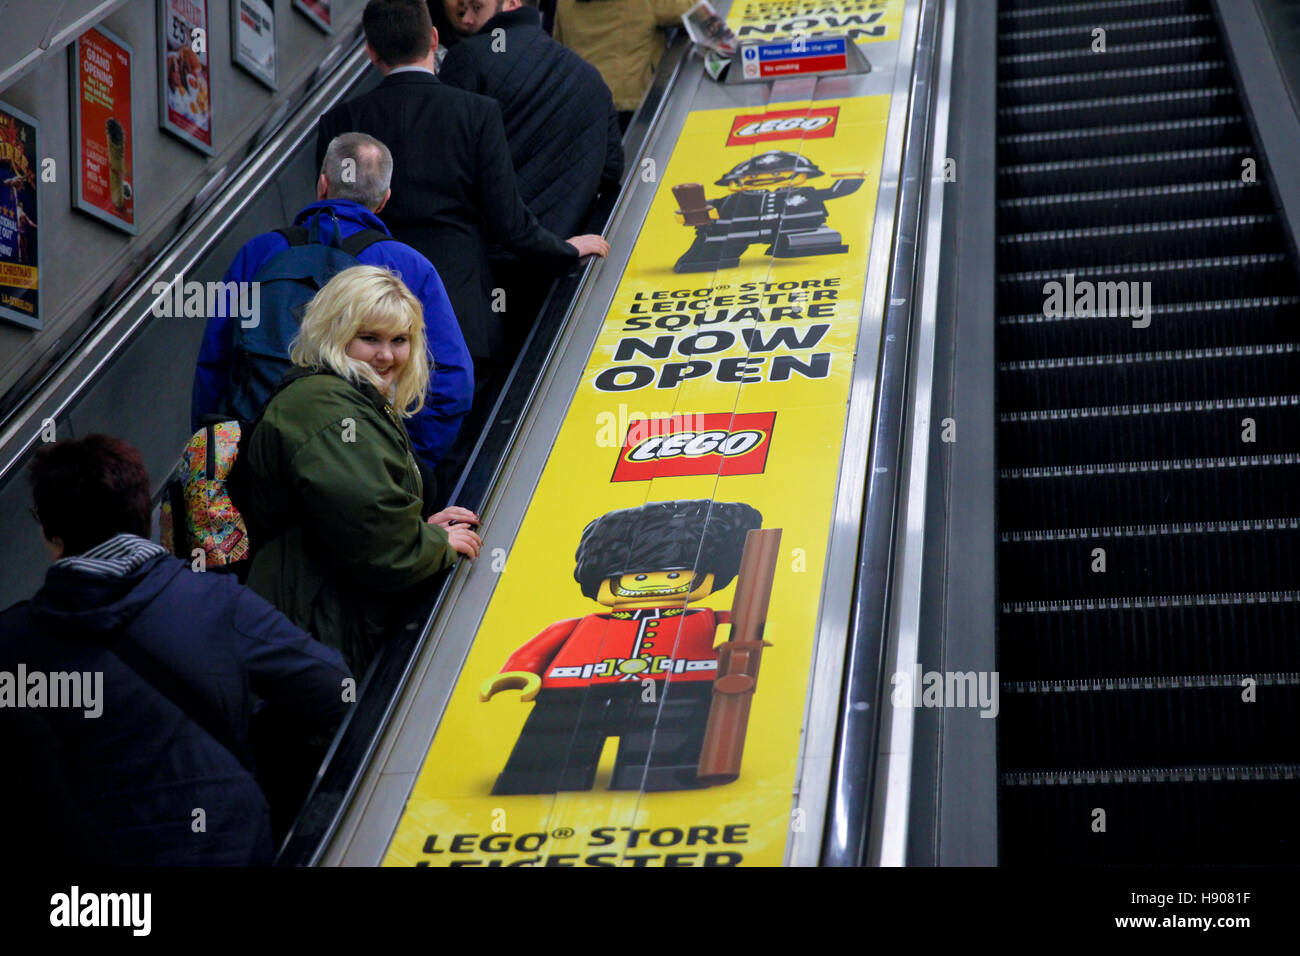 Leicester Square, London, UK. 17th Nov, 2016. LEGO stickers on the underground escalators at Leicester Square. Mayor of London, Sadiq Khan joins John Goodwin, Chief Financial Officer, The LEGO Group opens world's largest Lego store in Leicester Square, featuring iconic models, new technology and a tea-loving mascot. The new store features exclusive LEGO sets including Ð hands-on building area, building demonstration, Pick & Build Brick Wall and a life size London Underground tube carriage build in partnership with TfL, which is made up of 637,903 bricks Credit:  Dinendra Haria/Alamy Live News Stock Photo